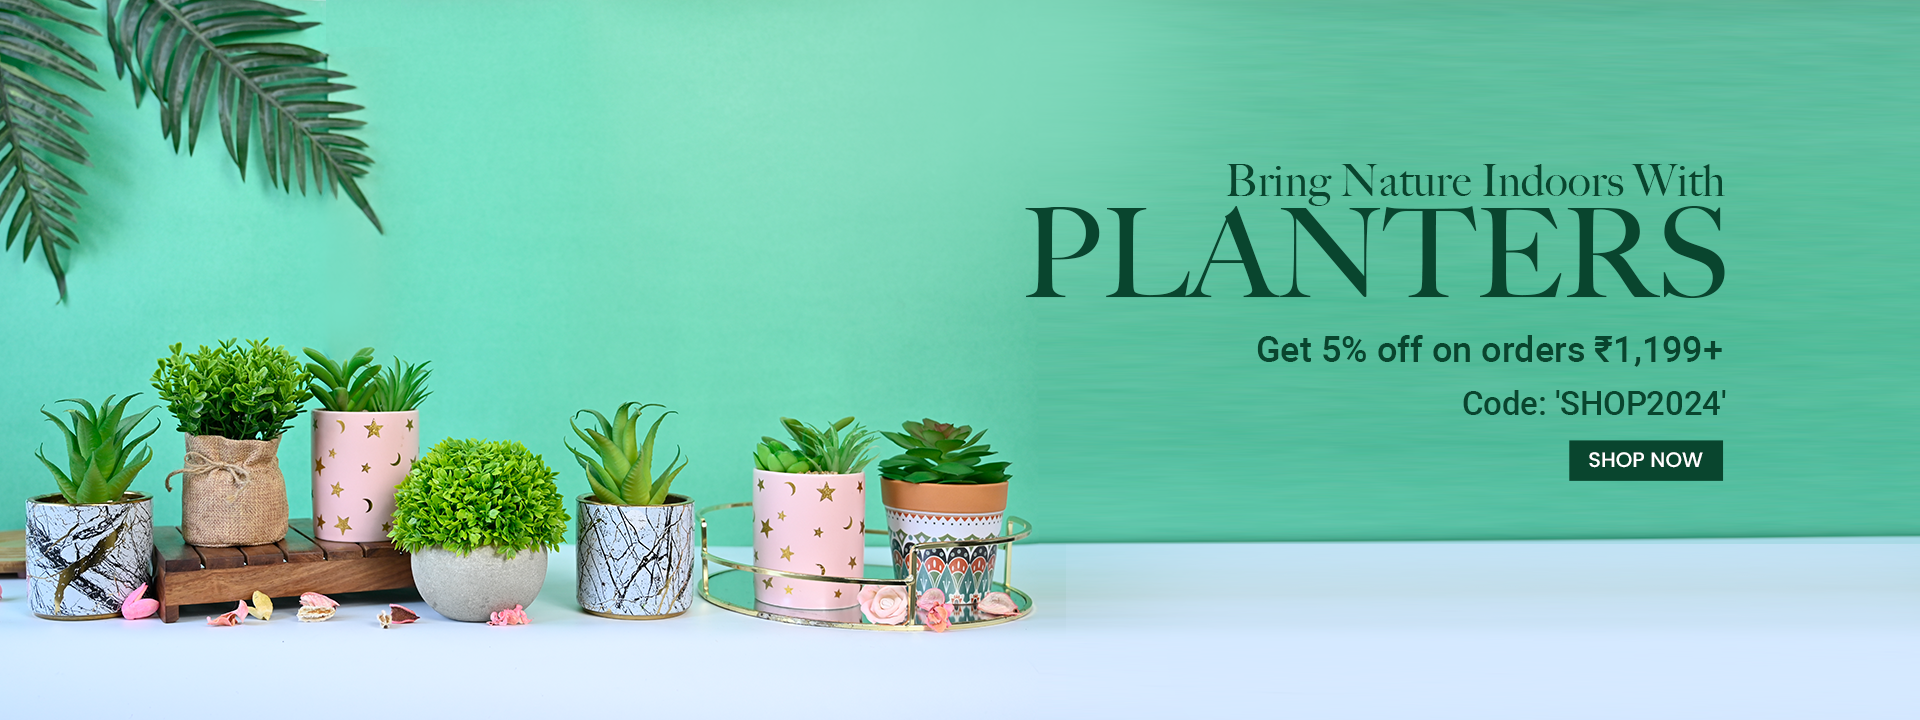 Tabletop_Planters_-_Market99_Planter_Banners.png